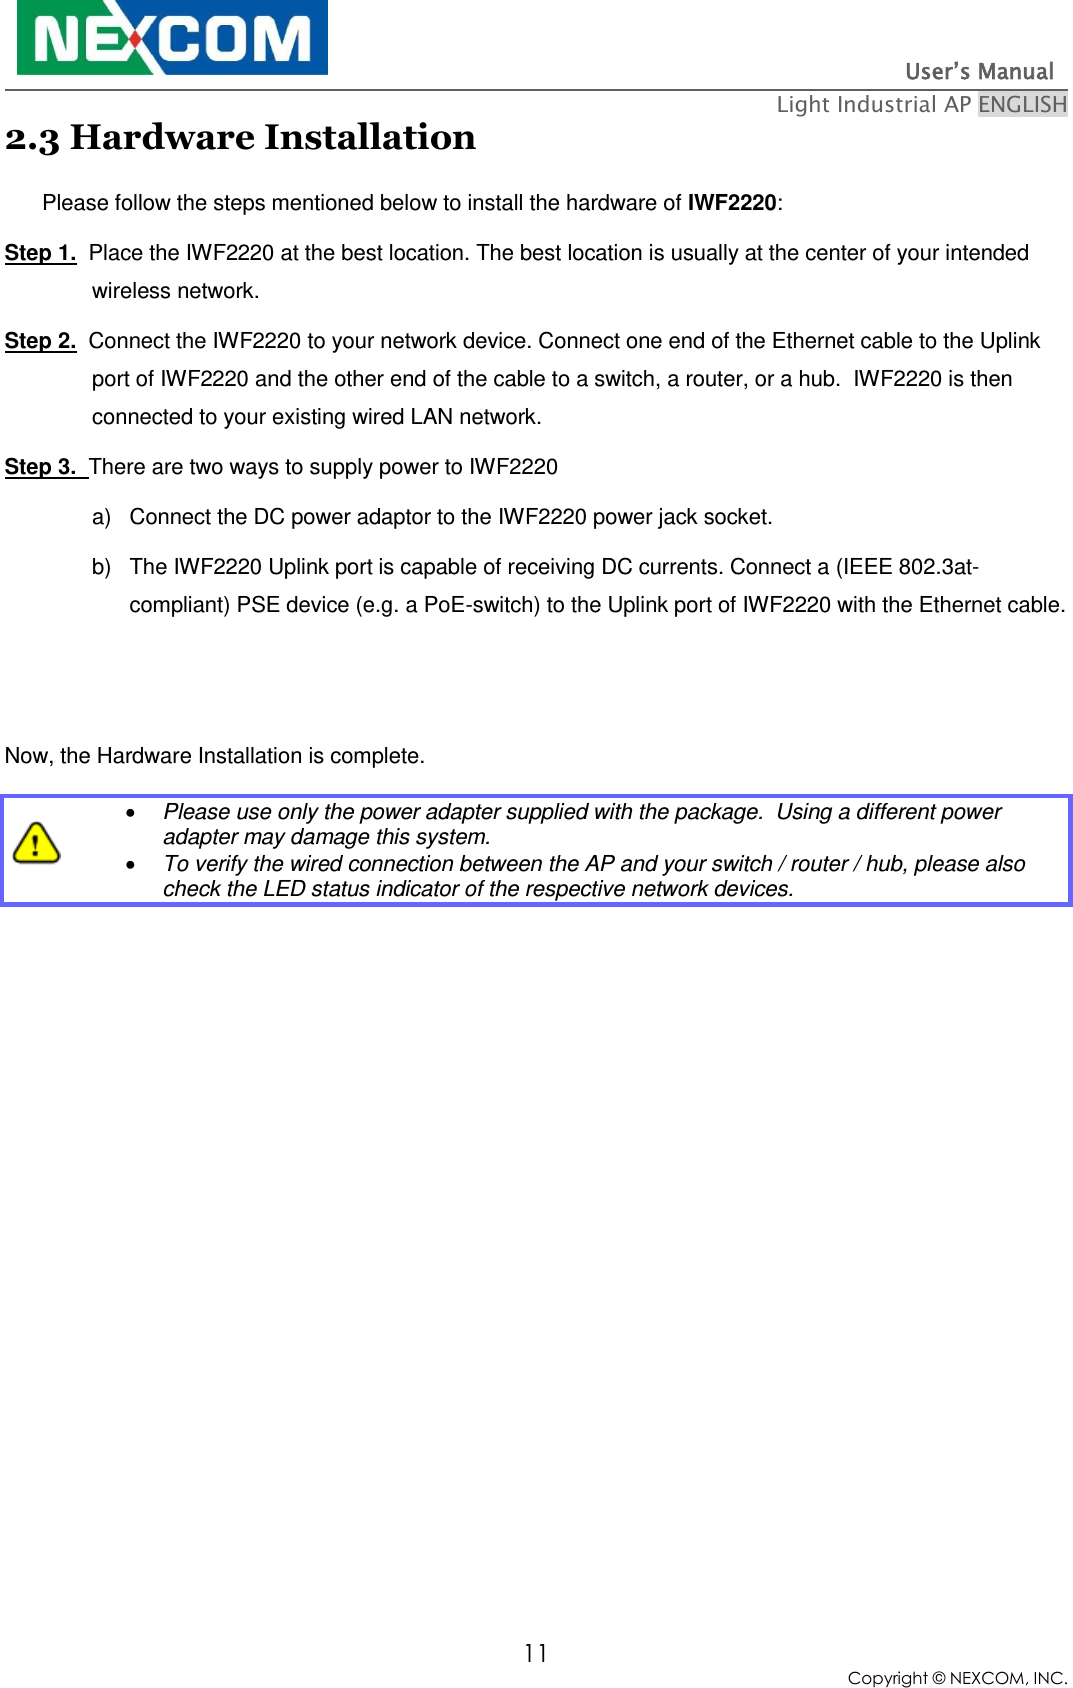                                                                          User’s Manual   Light Industrial AP ENGLISH 11 Copyright © NEXCOM, INC. 2.3 Hardware Installation Please follow the steps mentioned below to install the hardware of IWF2220: Step 1.  Place the IWF2220 at the best location. The best location is usually at the center of your intended wireless network. Step 2.  Connect the IWF2220 to your network device. Connect one end of the Ethernet cable to the Uplink port of IWF2220 and the other end of the cable to a switch, a router, or a hub.  IWF2220 is then connected to your existing wired LAN network.  Step 3.  There are two ways to supply power to IWF2220 a)  Connect the DC power adaptor to the IWF2220 power jack socket. b)  The IWF2220 Uplink port is capable of receiving DC currents. Connect a (IEEE 802.3at-compliant) PSE device (e.g. a PoE-switch) to the Uplink port of IWF2220 with the Ethernet cable.   Now, the Hardware Installation is complete.   Please use only the power adapter supplied with the package.  Using a different power adapter may damage this system.  To verify the wired connection between the AP and your switch / router / hub, please also check the LED status indicator of the respective network devices.  